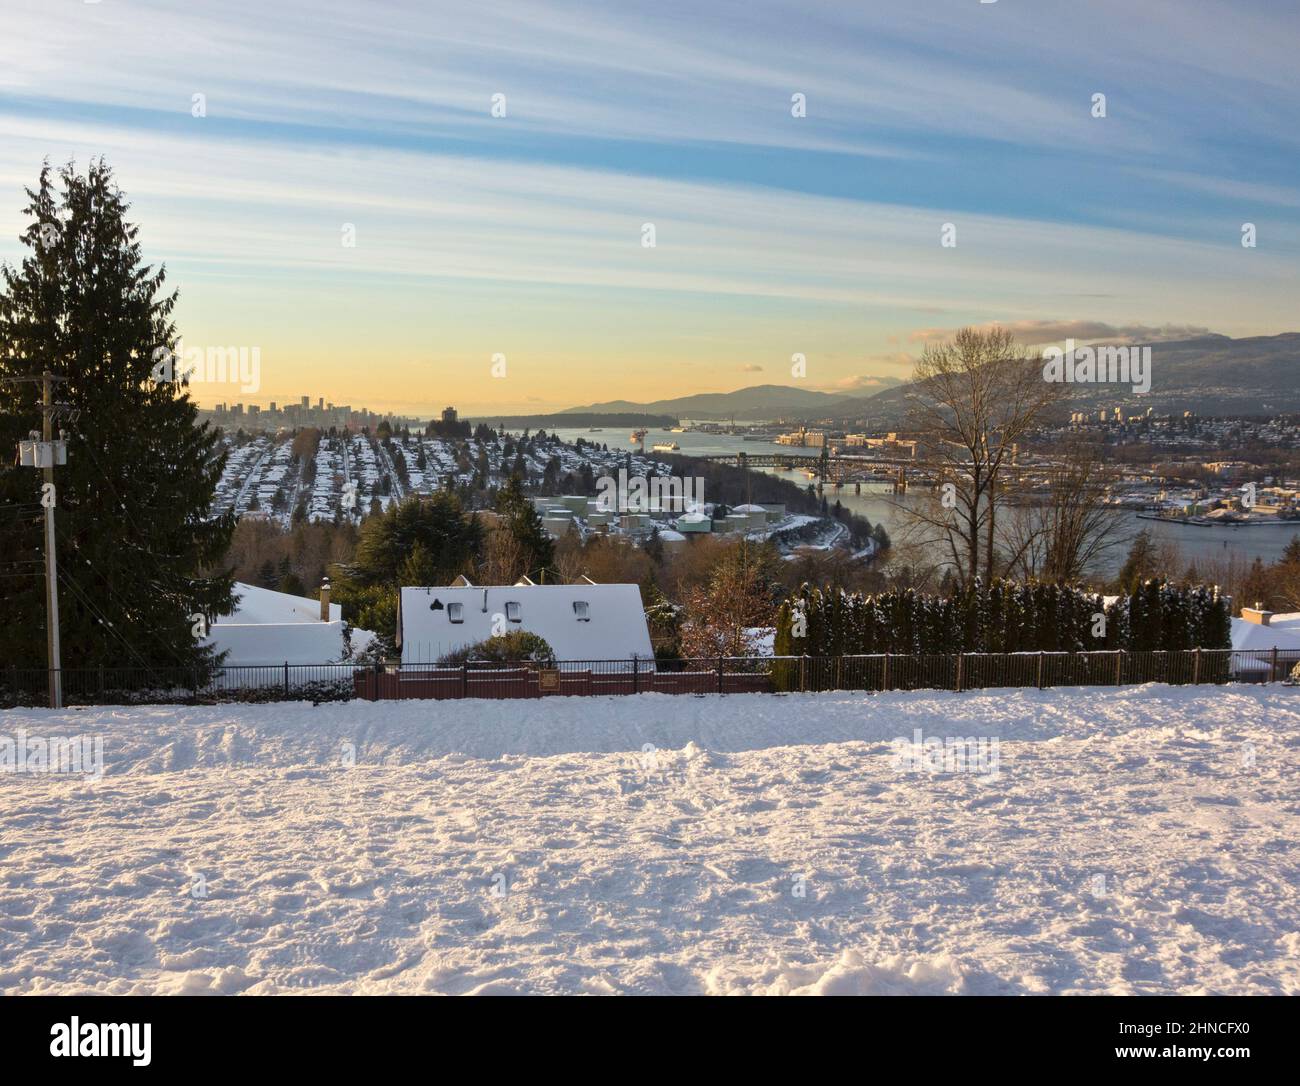 Looking West from Burnaby towards the downtown Vancouver, the Burrard Inlet, and the North Shore mountains on a Winter day with snow. Stock Photo